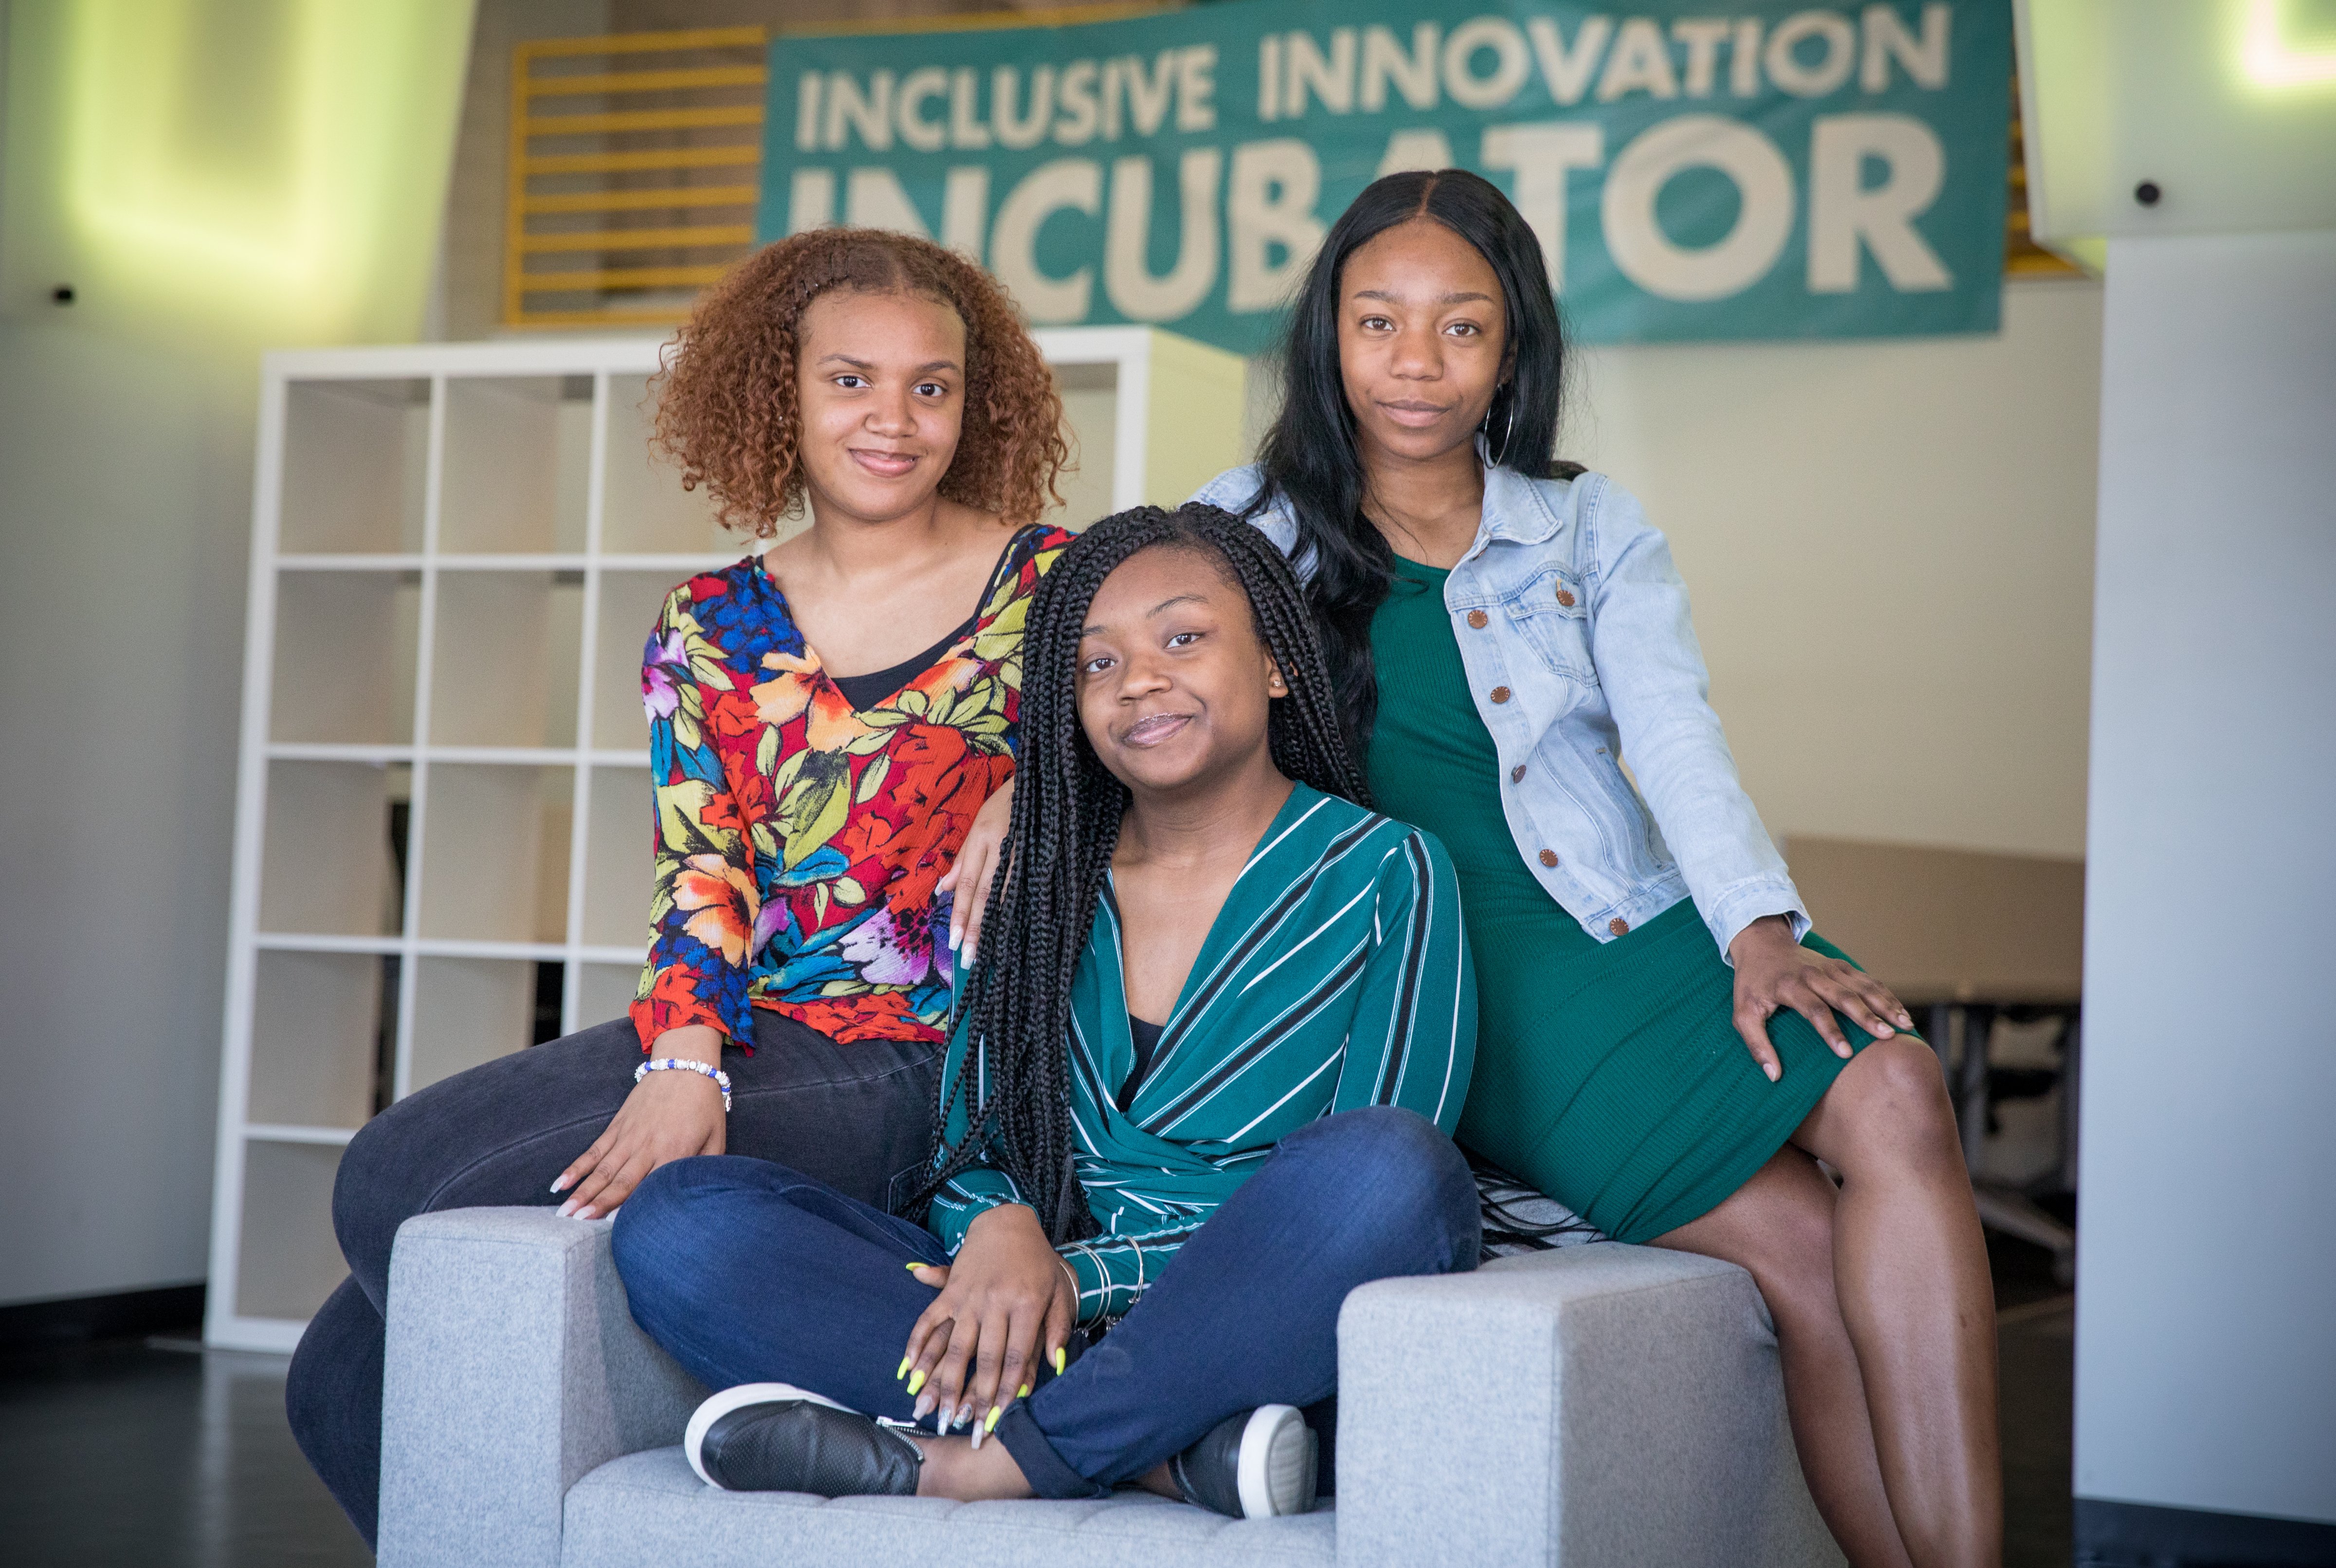 From left: India Skinner, Mikayla Sharrieff, and Bria Snell, 11th graders from Banneker High School in Washington, D.C., finalists in a NASA youth science competition, pictured on May 1, 2018. (Evelyn Hockstein—The Washington Post/Getty Images)